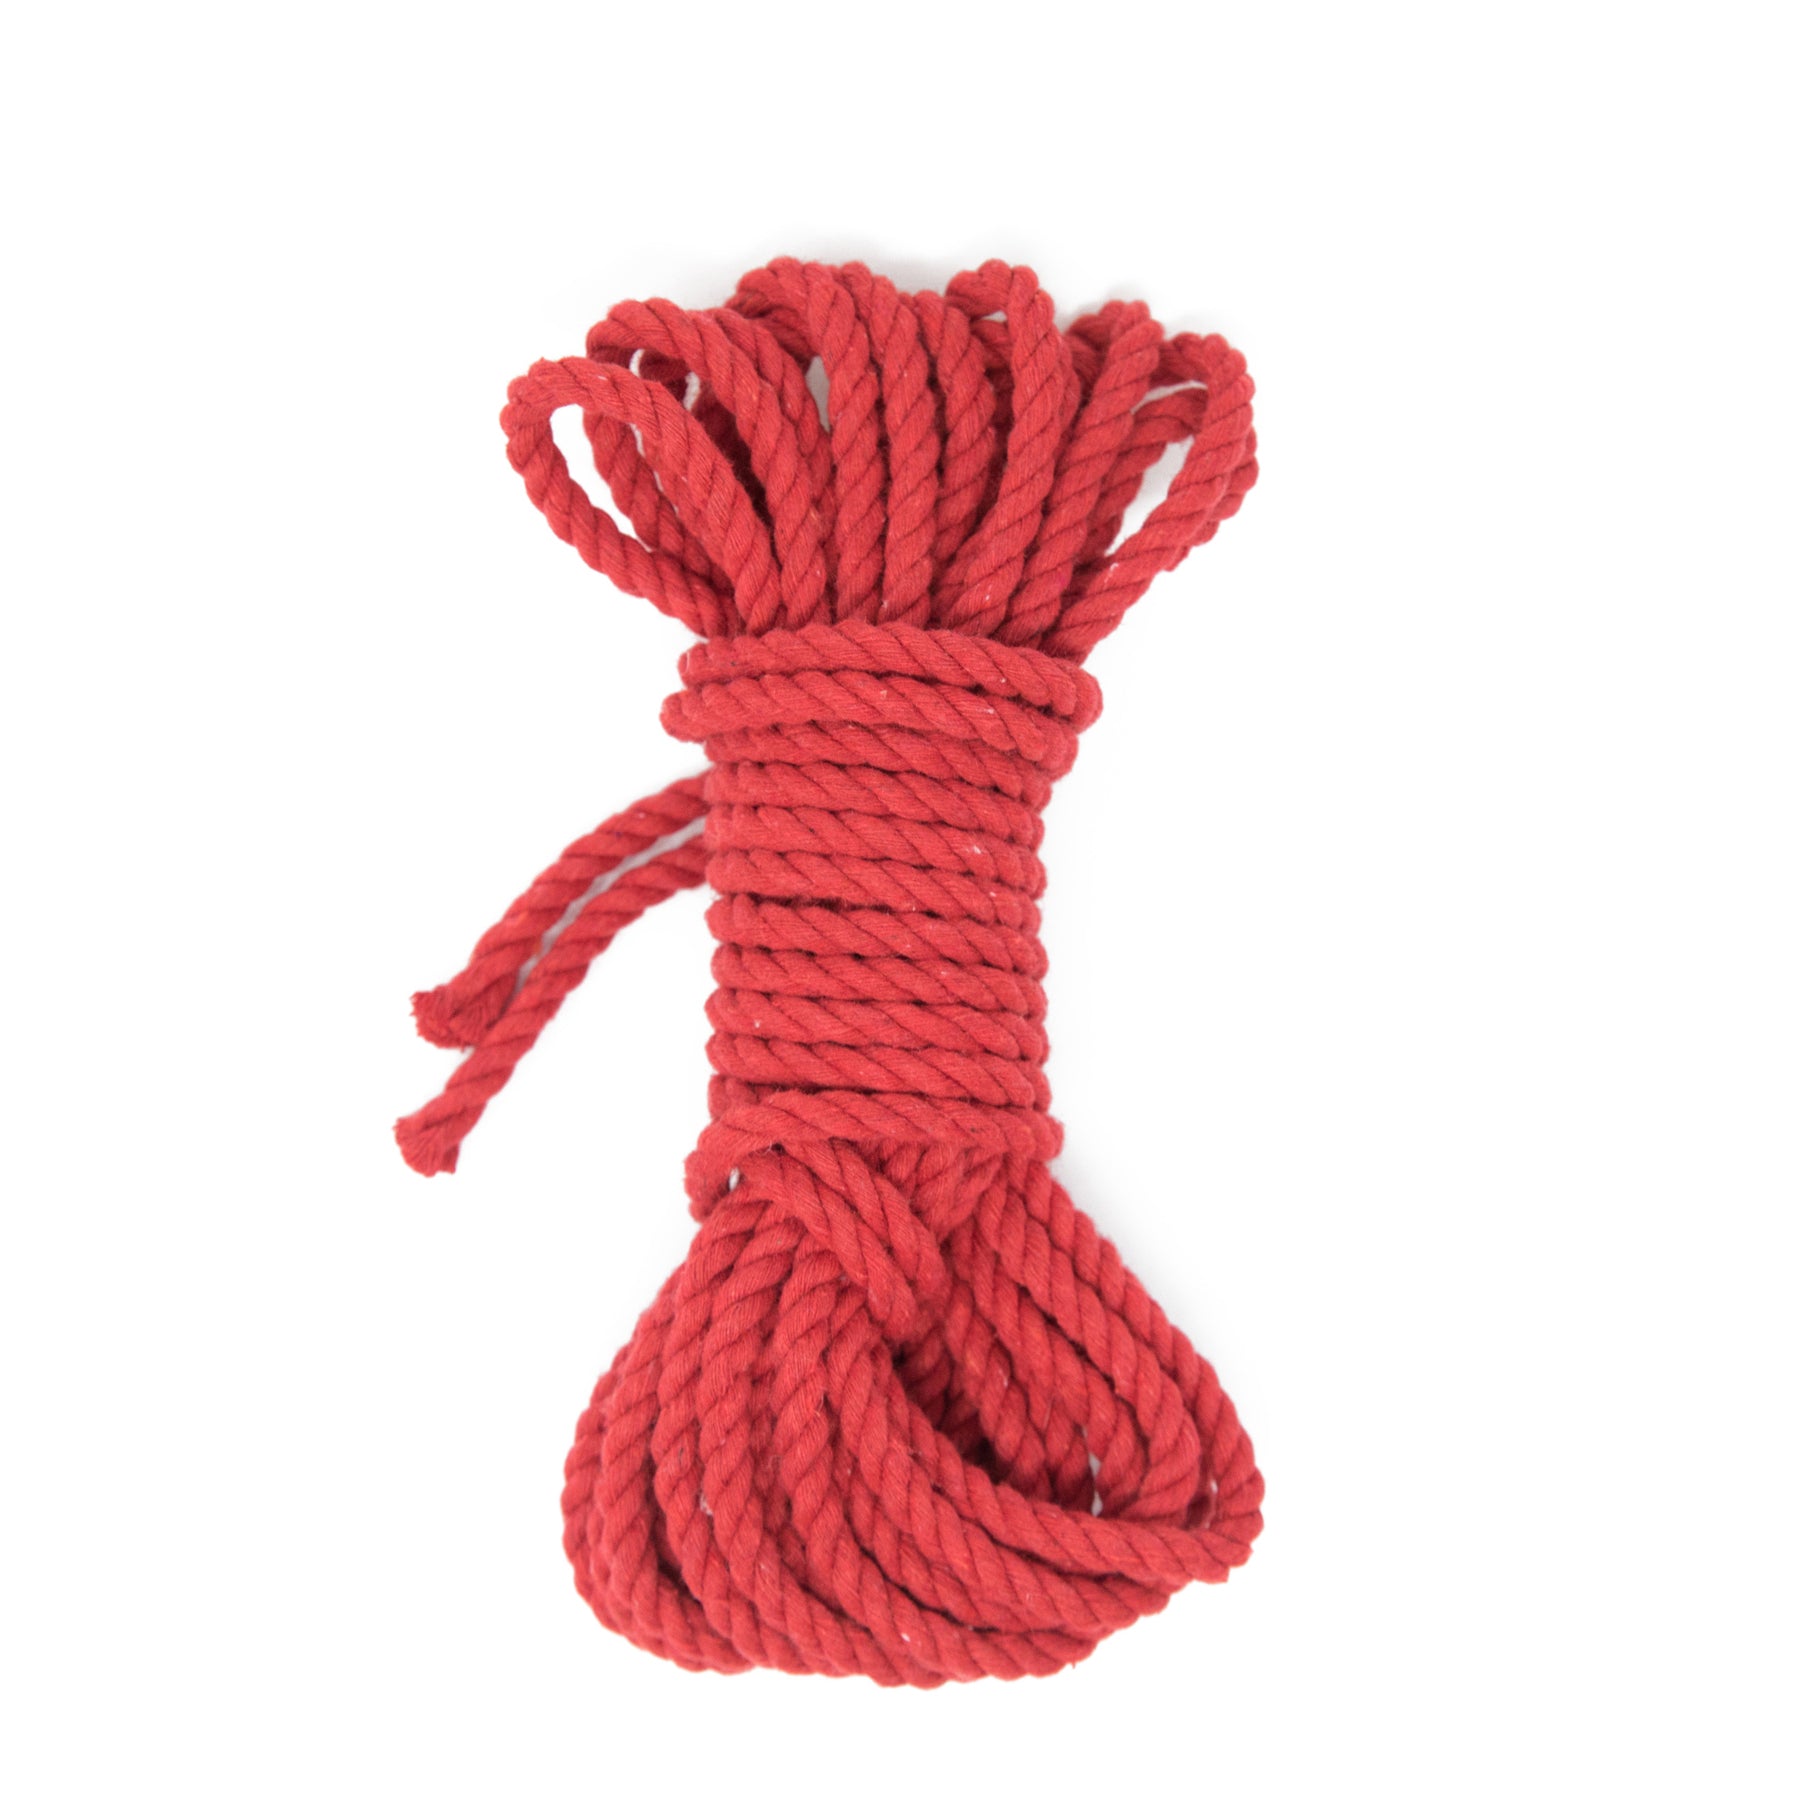 1/4 Twisted Cotton Rope Kit-Cookie Monster